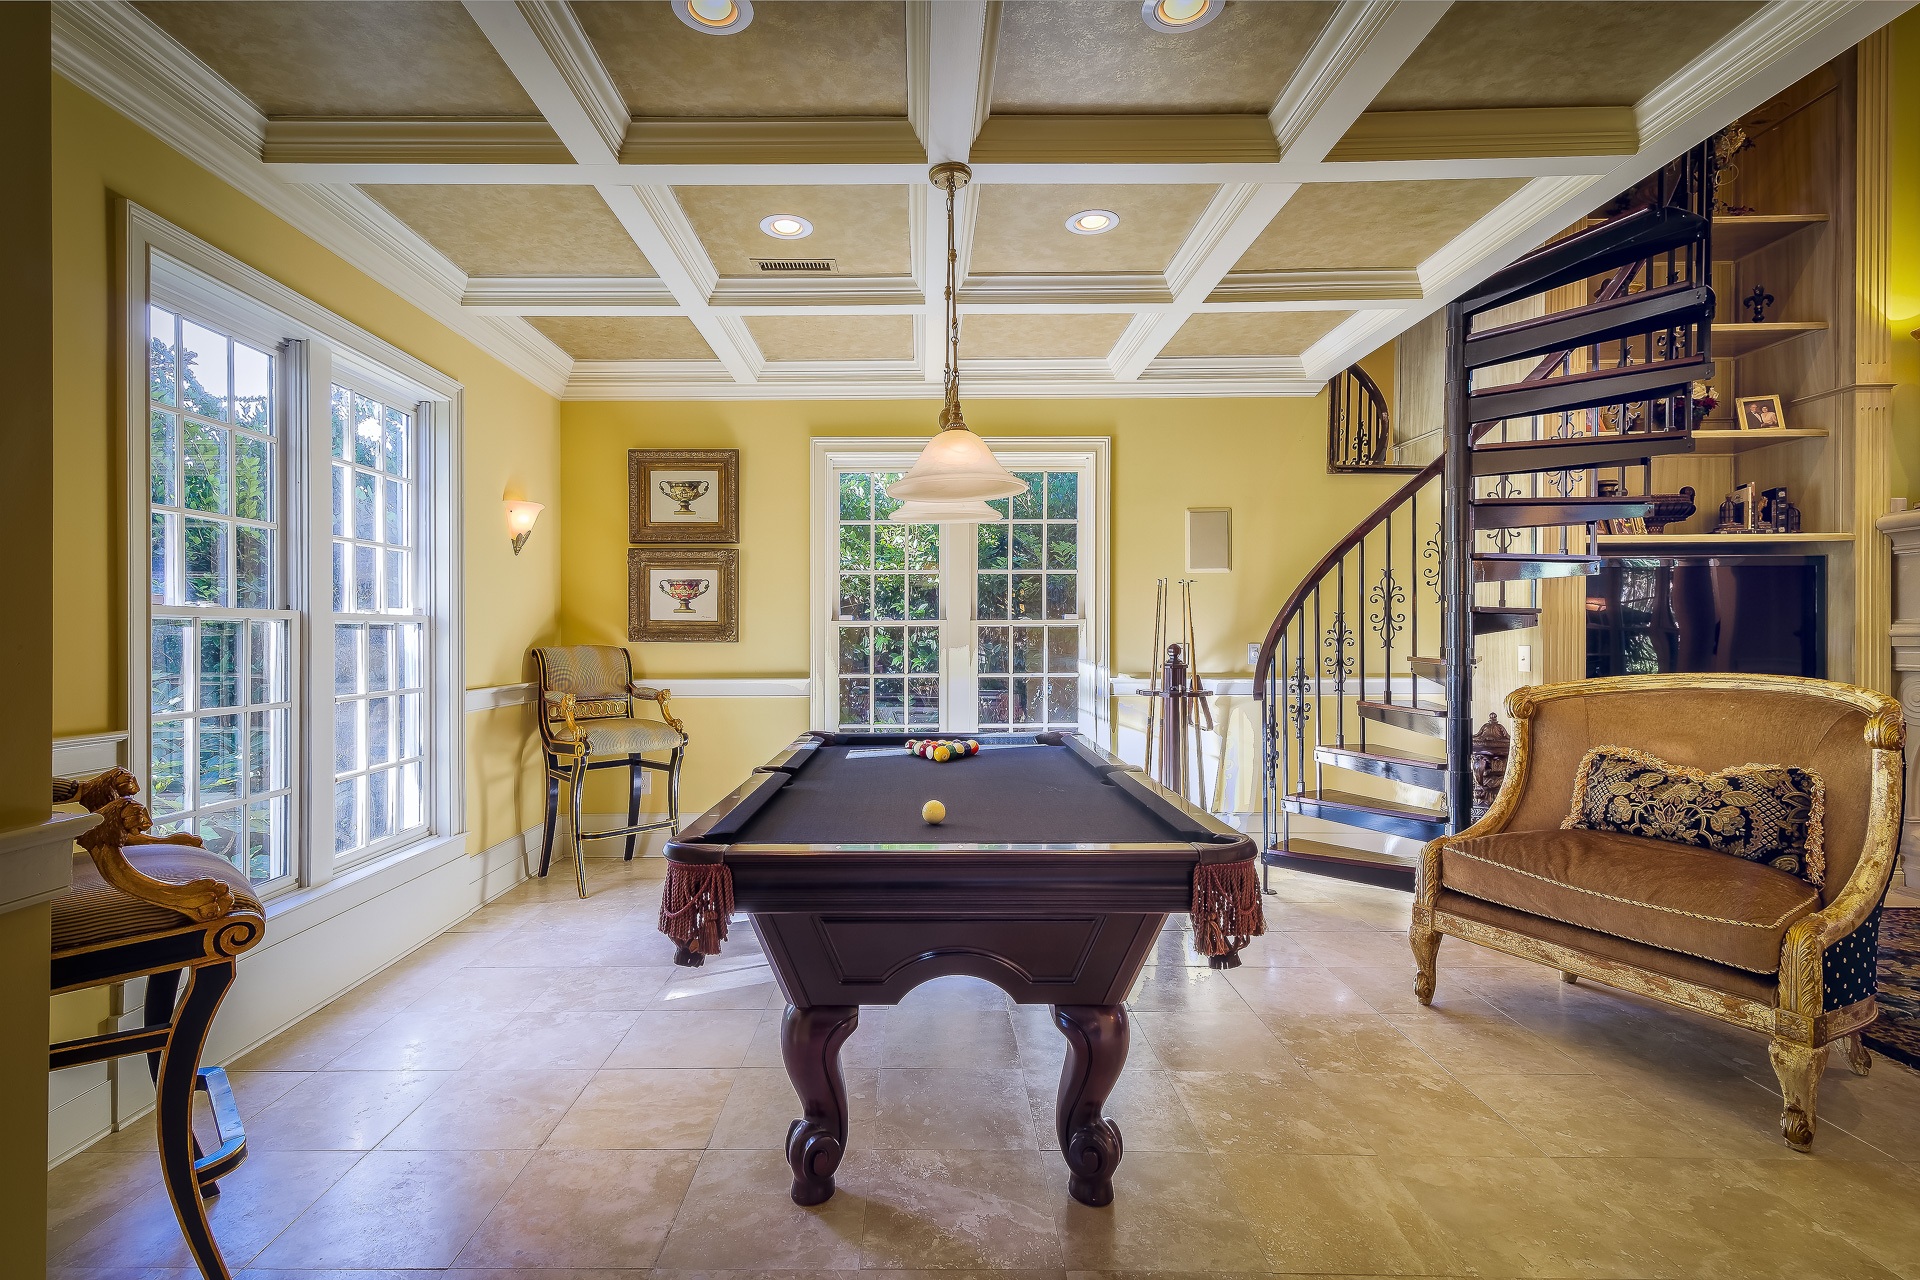 Pool Room with pool table